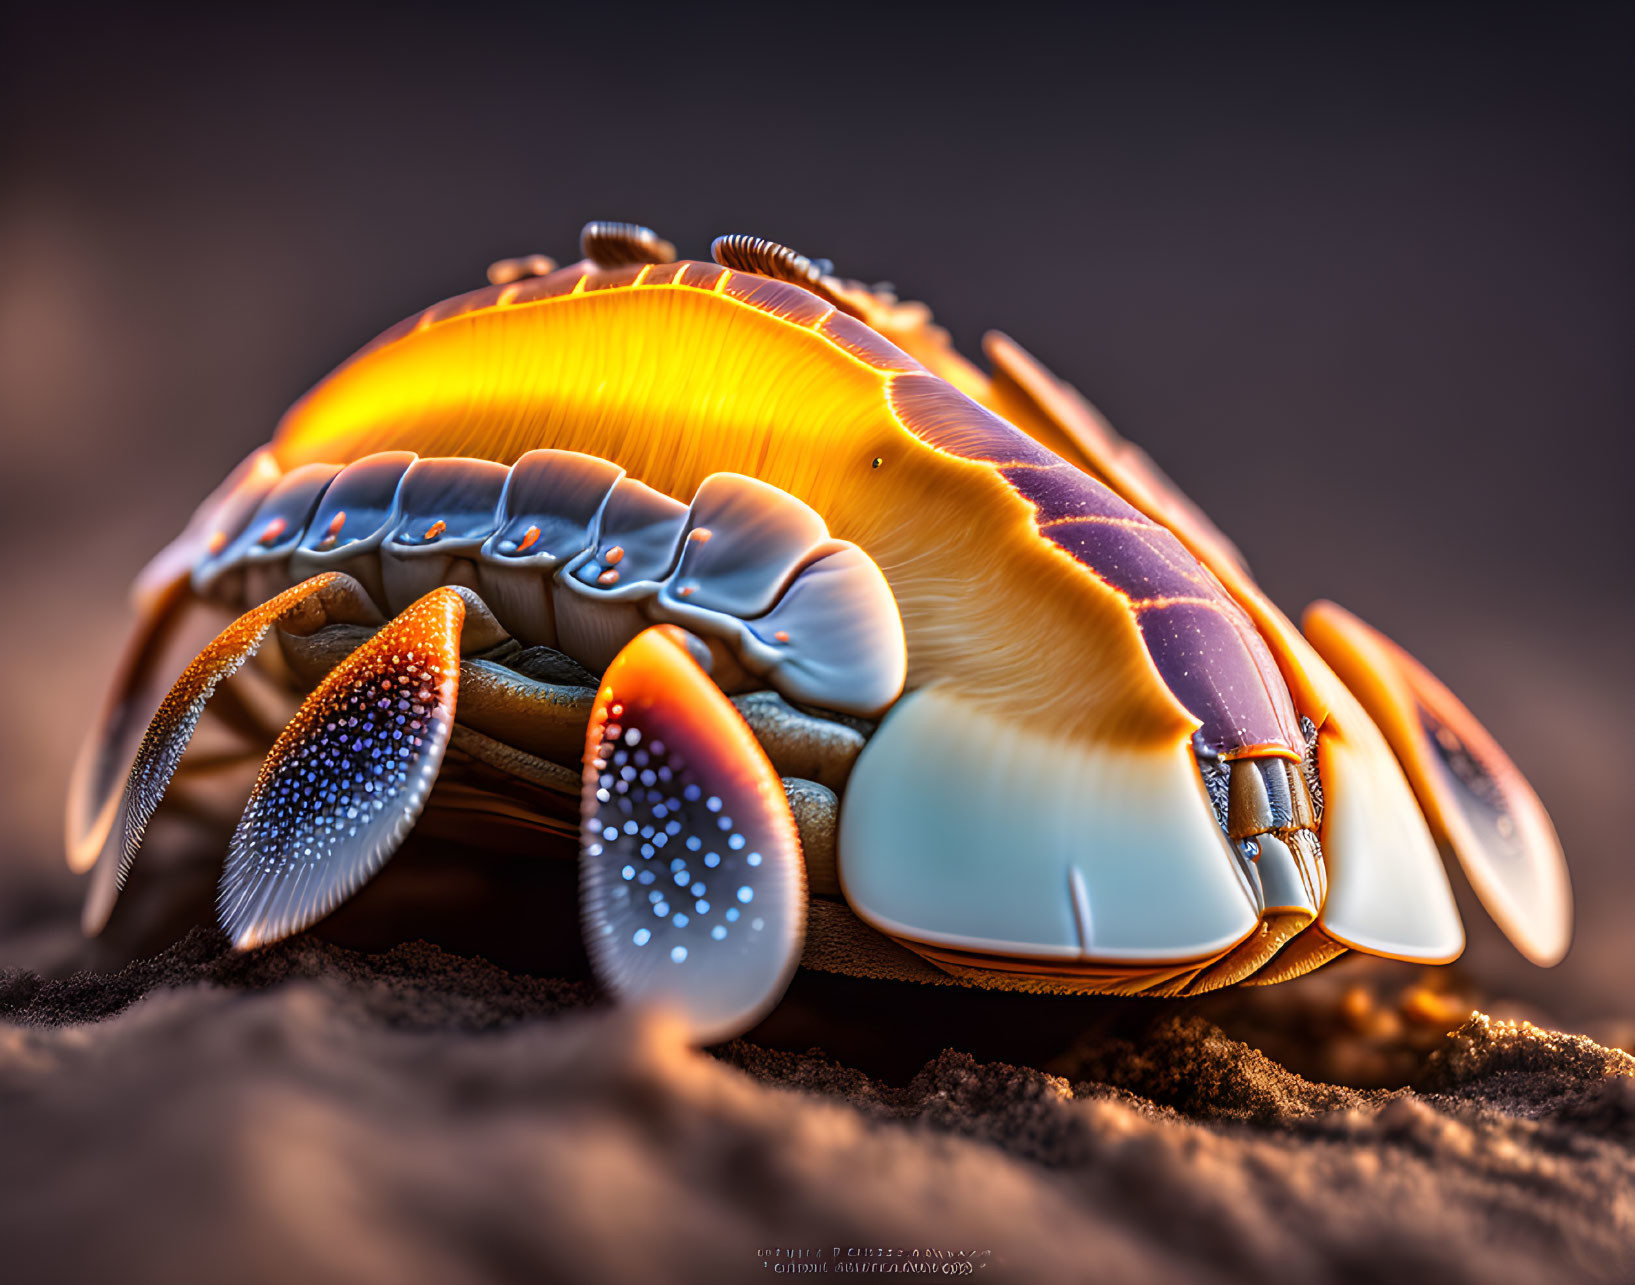 Colorful Crab with Orange and White Shell Resting on Sand in Warm Light